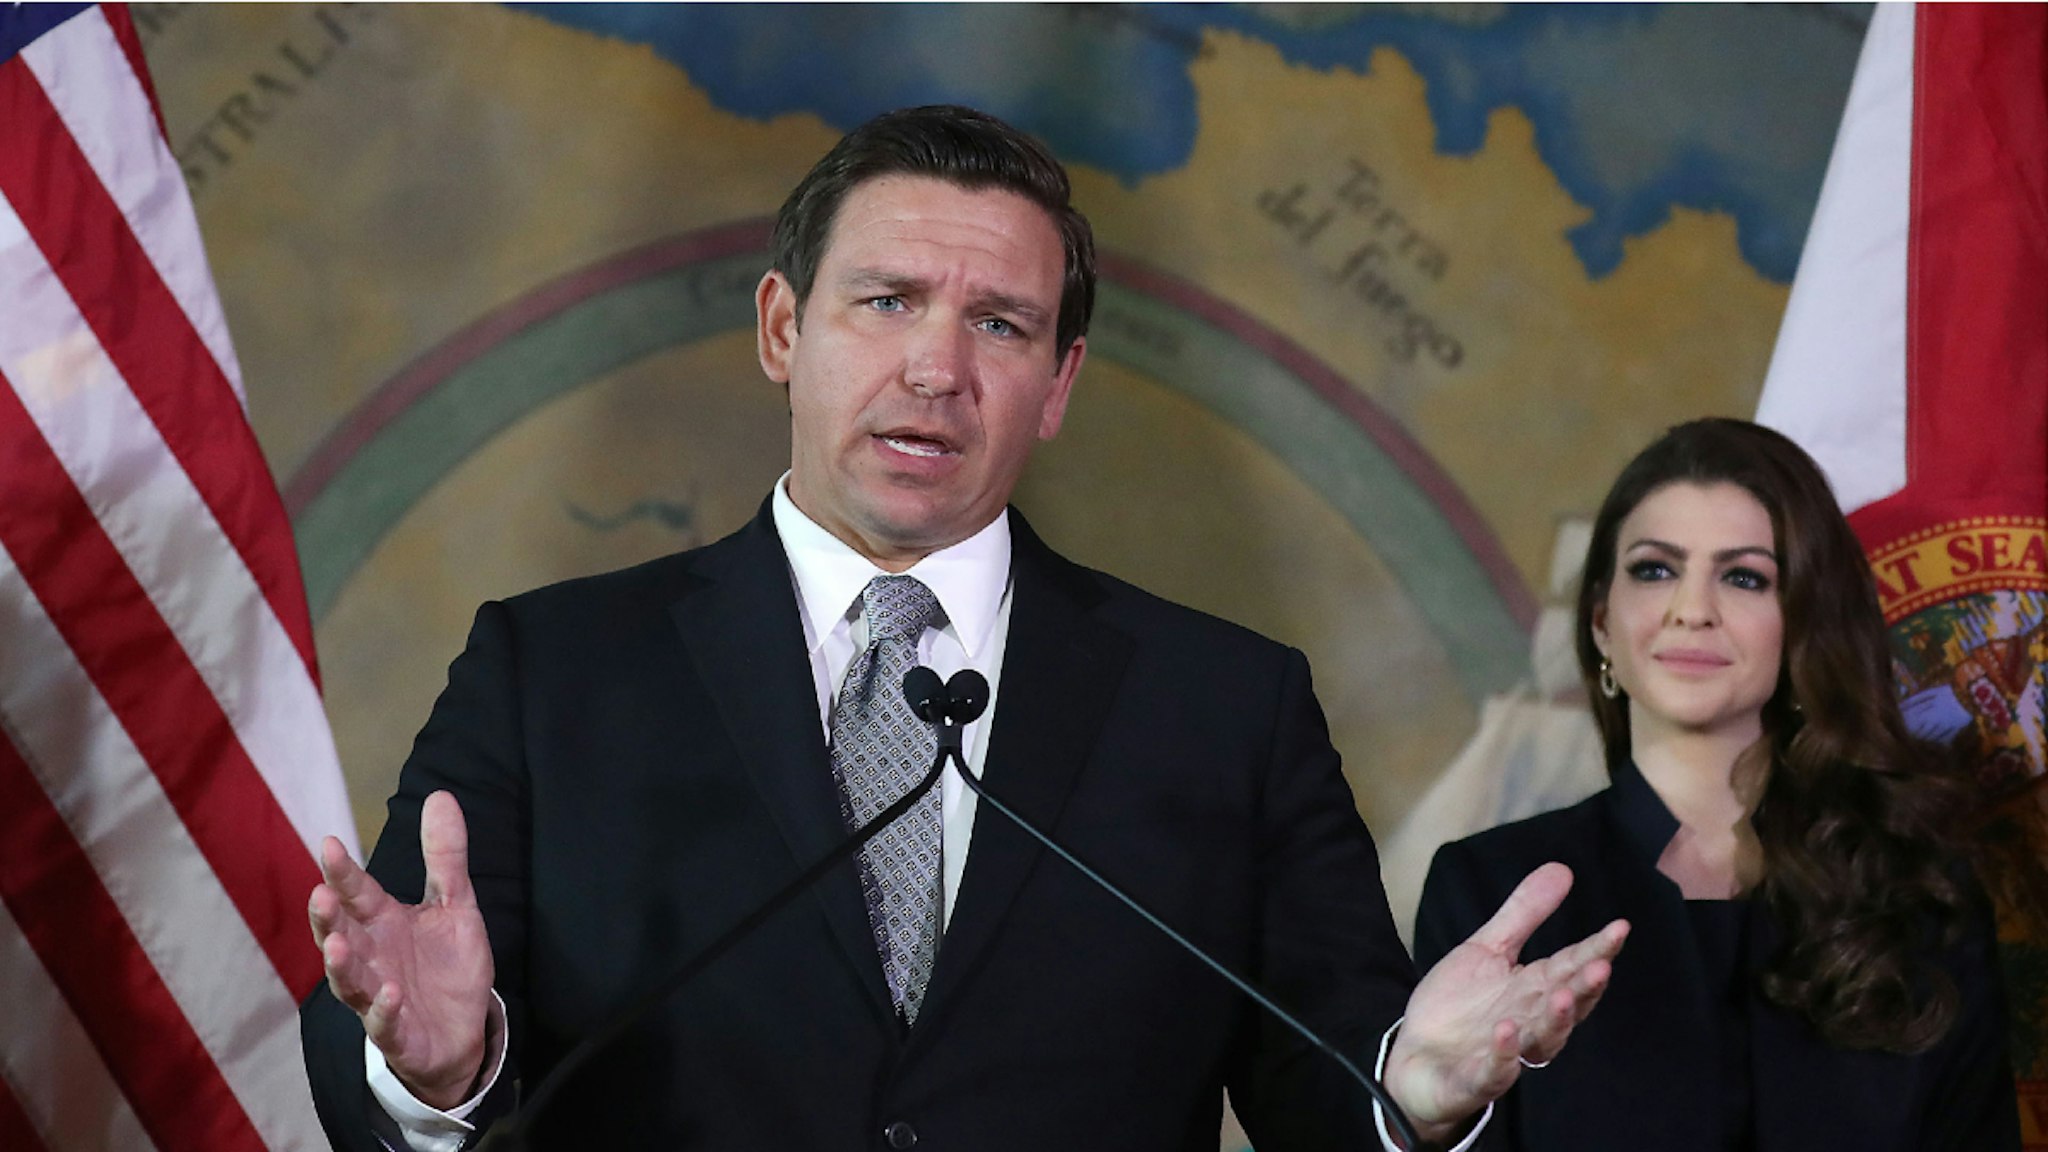 MIAMI, FLORIDA - JANUARY 09: Newly sworn-in Gov. Ron DeSantis speaks, as his wife Casey DeSantis stands near him, during an event at the Freedom Tower where he named Barbara Lagoa to the Florida Supreme Court on January 09, 2019 in Miami, Florida. Mr. DeSantis was sworn in yesterday as the 46th governor of the state of Florida.